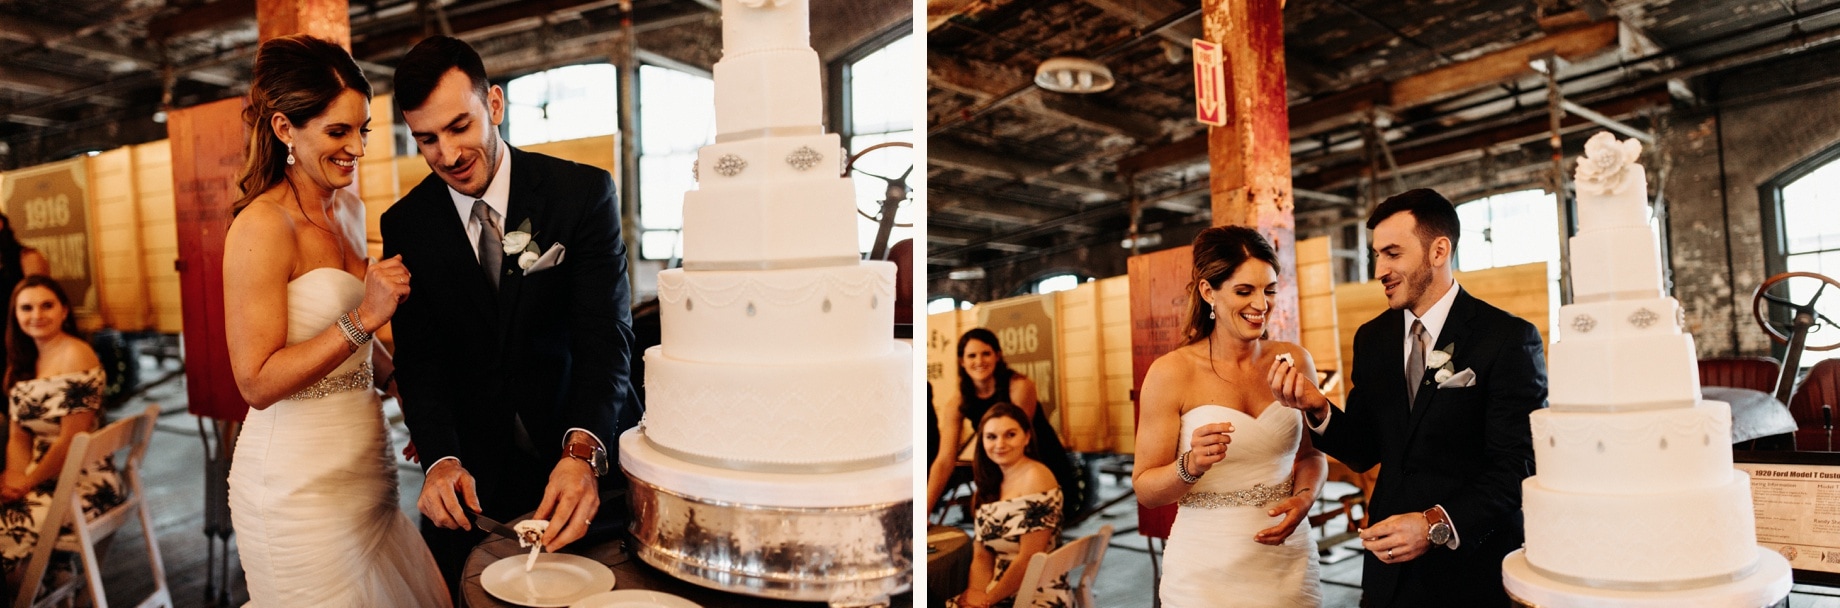 cake cutting at a ford piquette plant wedding